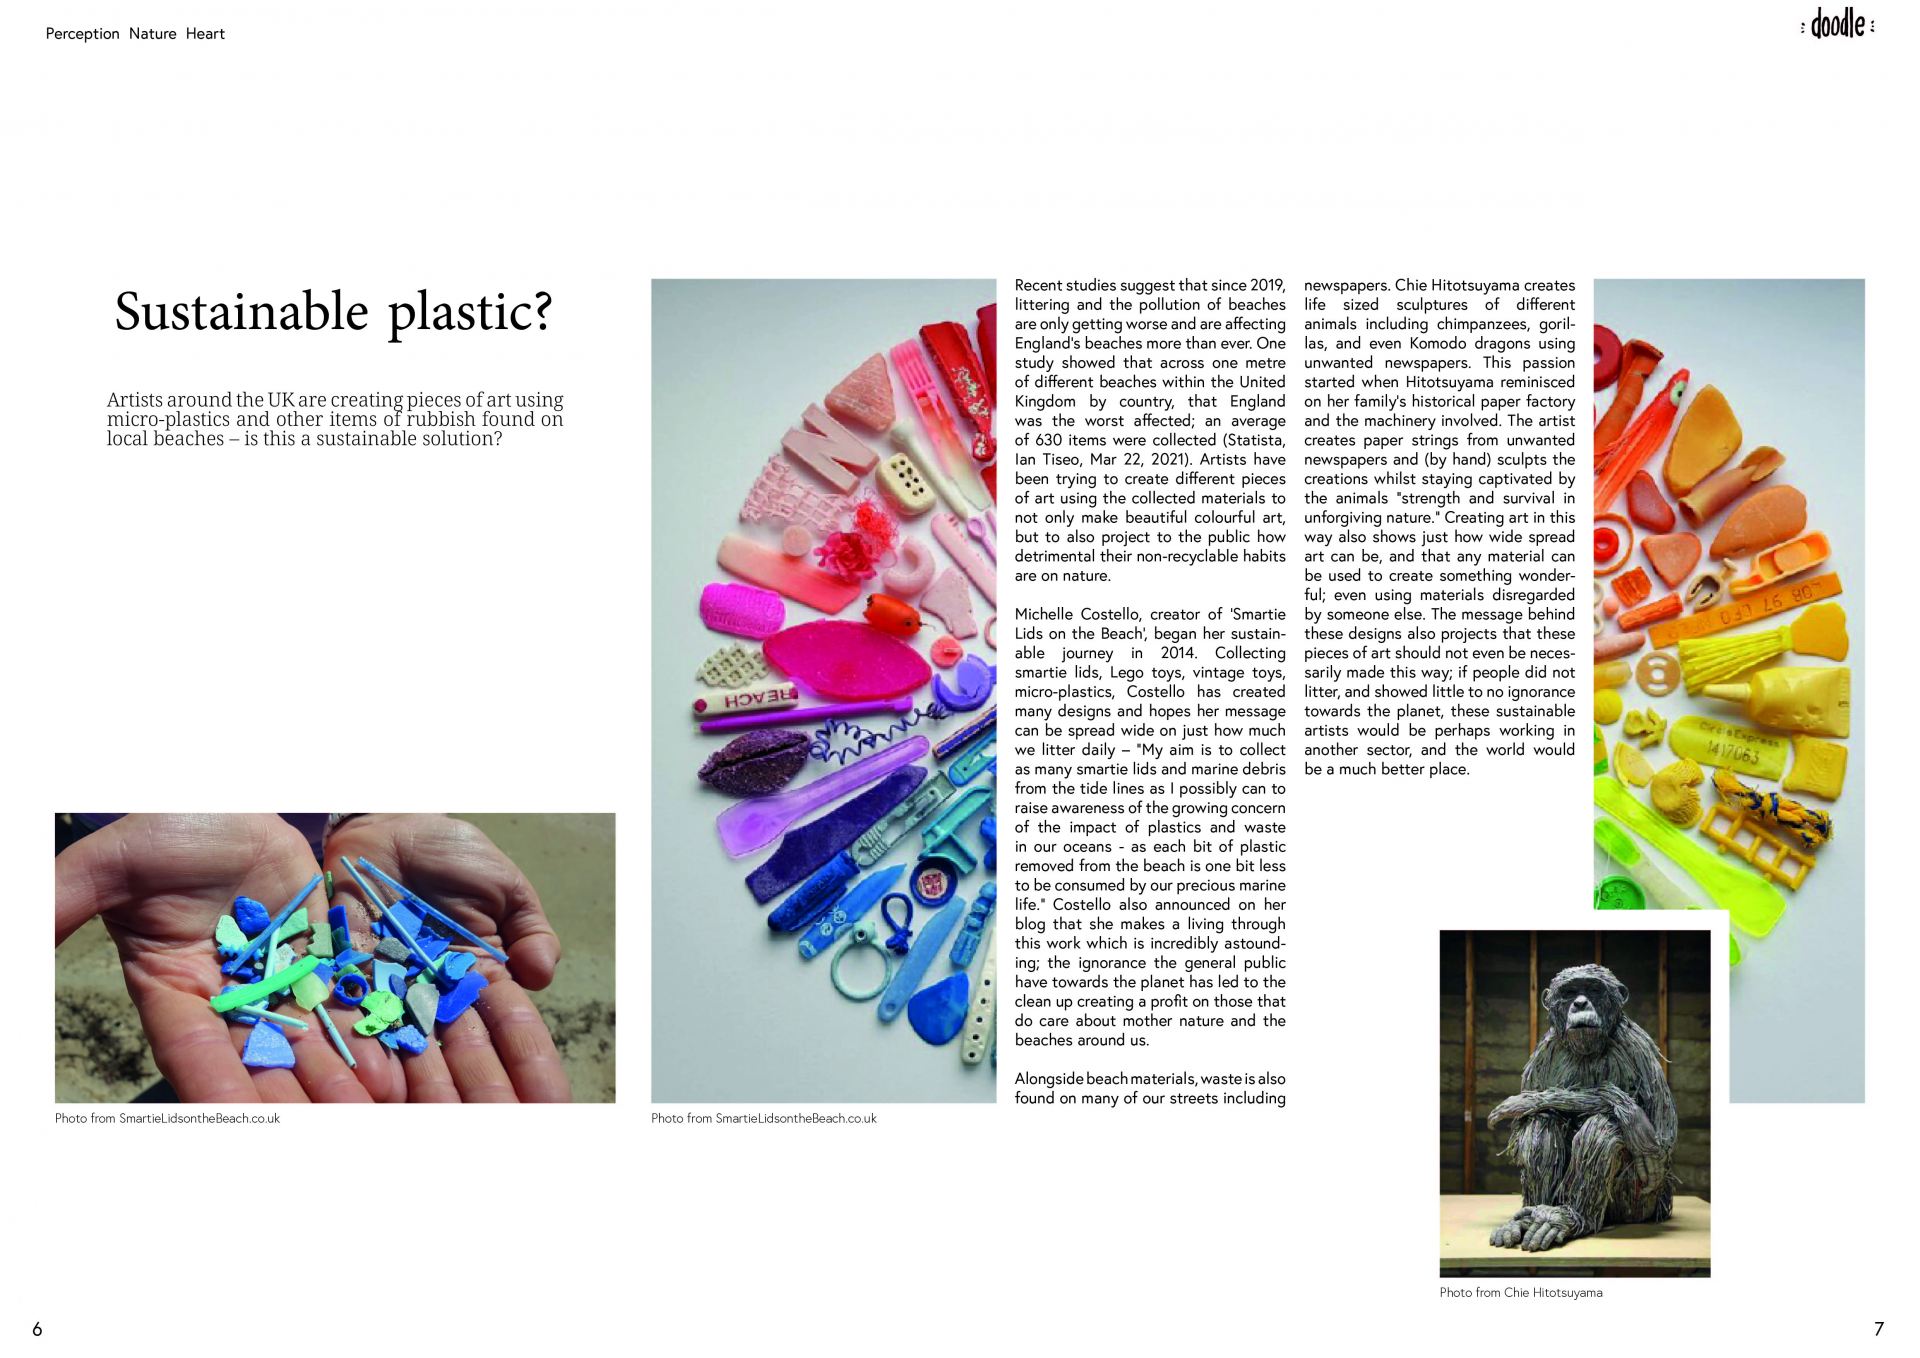 Magazine. One page from a magazine project. The main genre was a creative magazine, and so the article links creativity with sustainability.